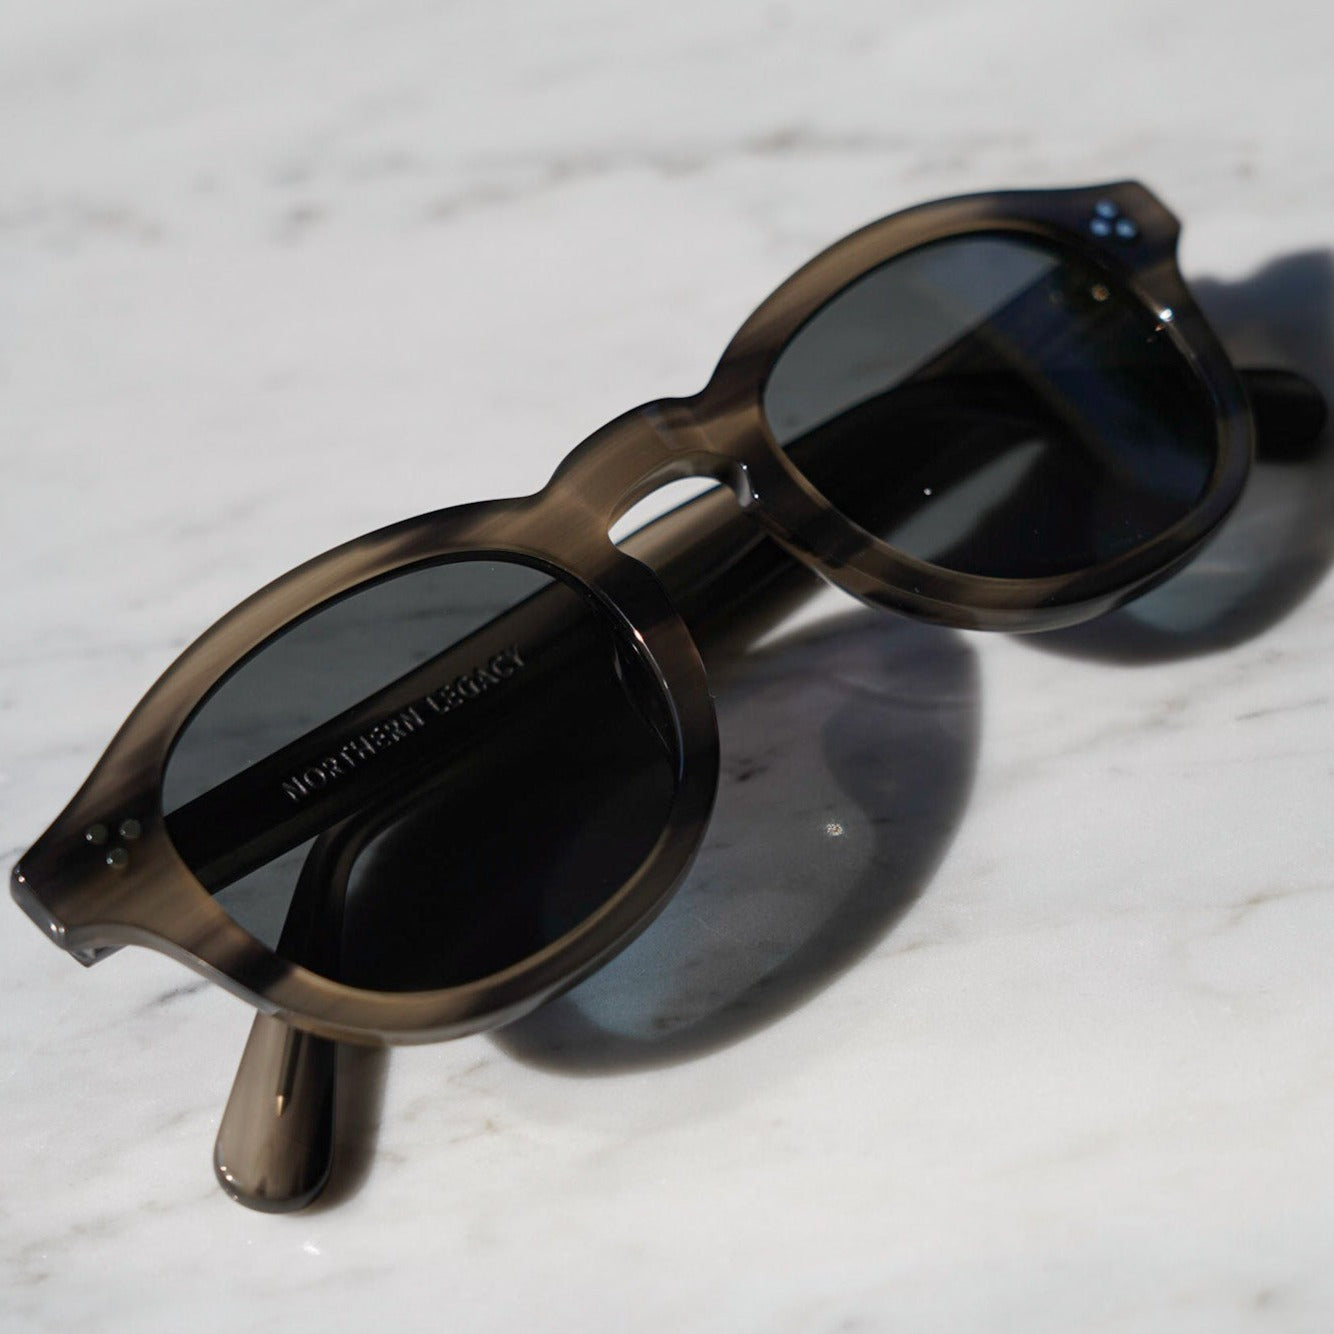 Legacy sunglasses - Mysterious grey